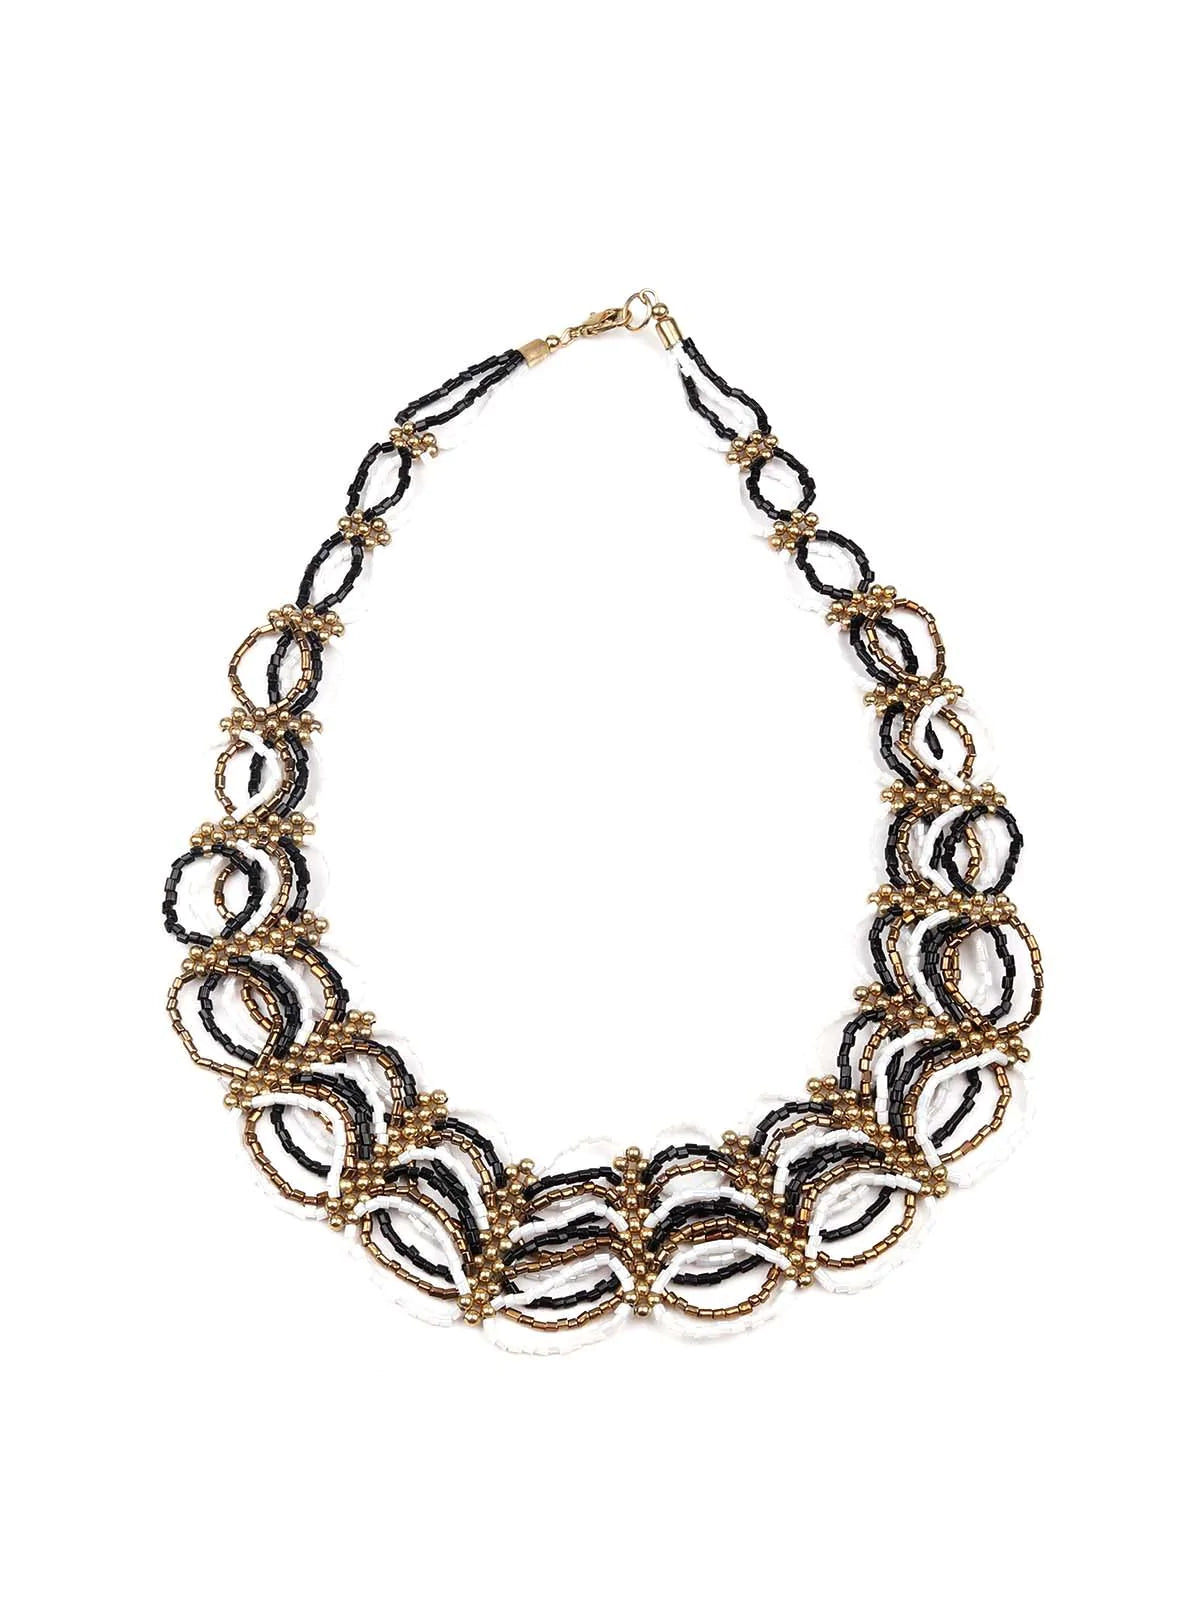 Women's A Gorgeous Color Blended Statement Necklace For Women - Odette